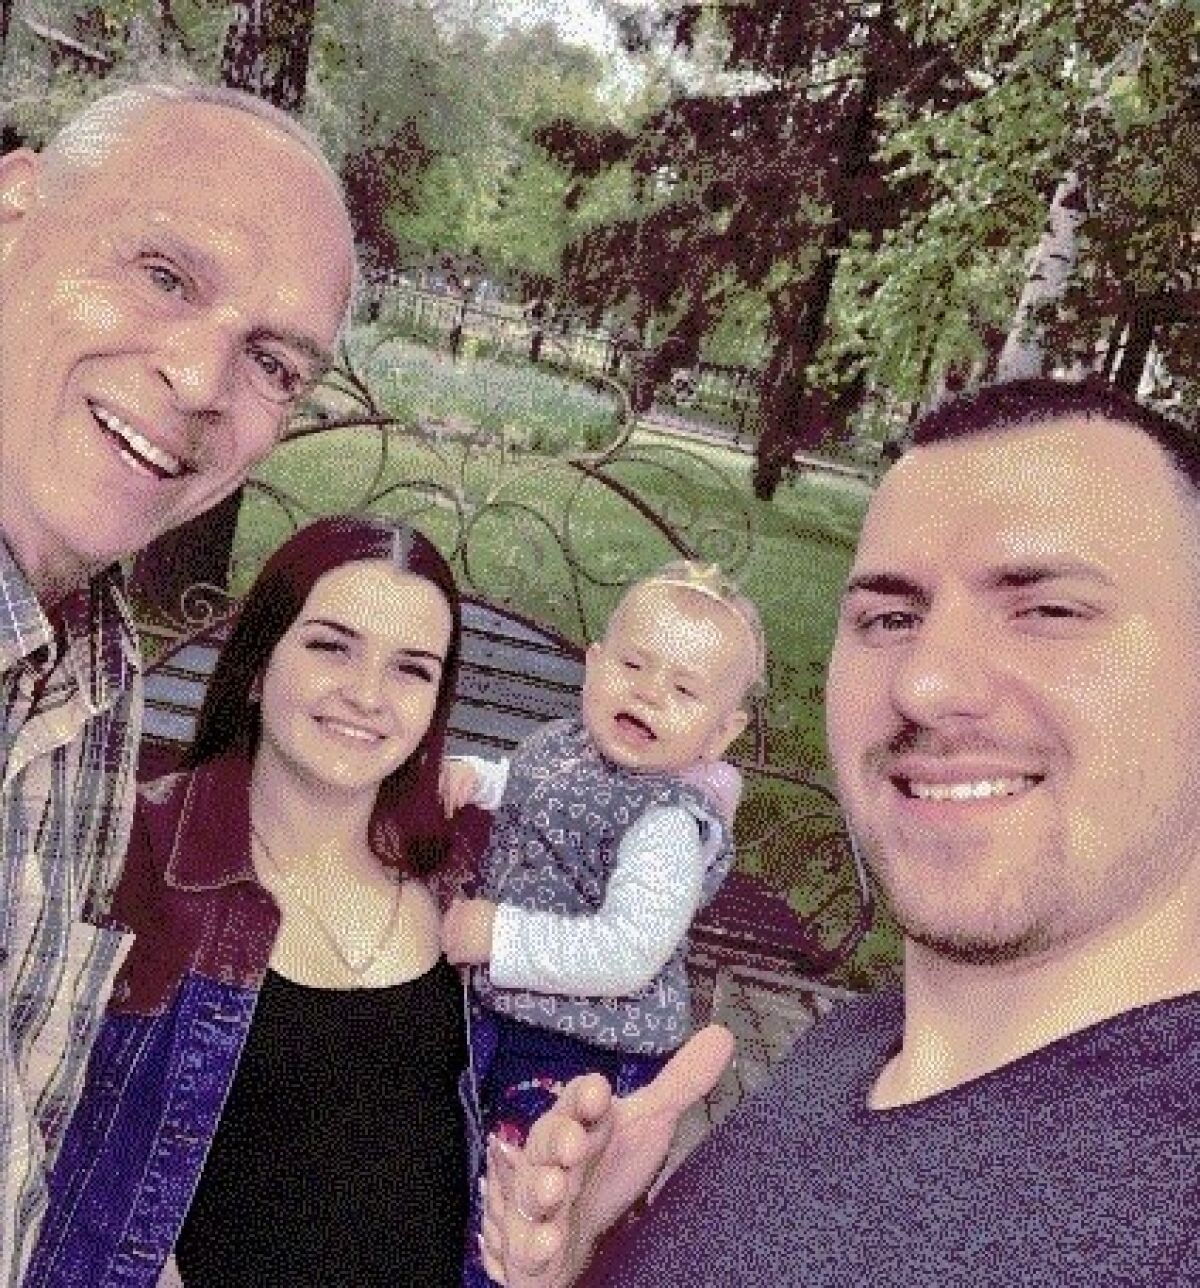 Steve Howser (left) visited Polina and Zhenya Polshchak in Ukraine in April 2021. He just helped them relocate to Ireland.